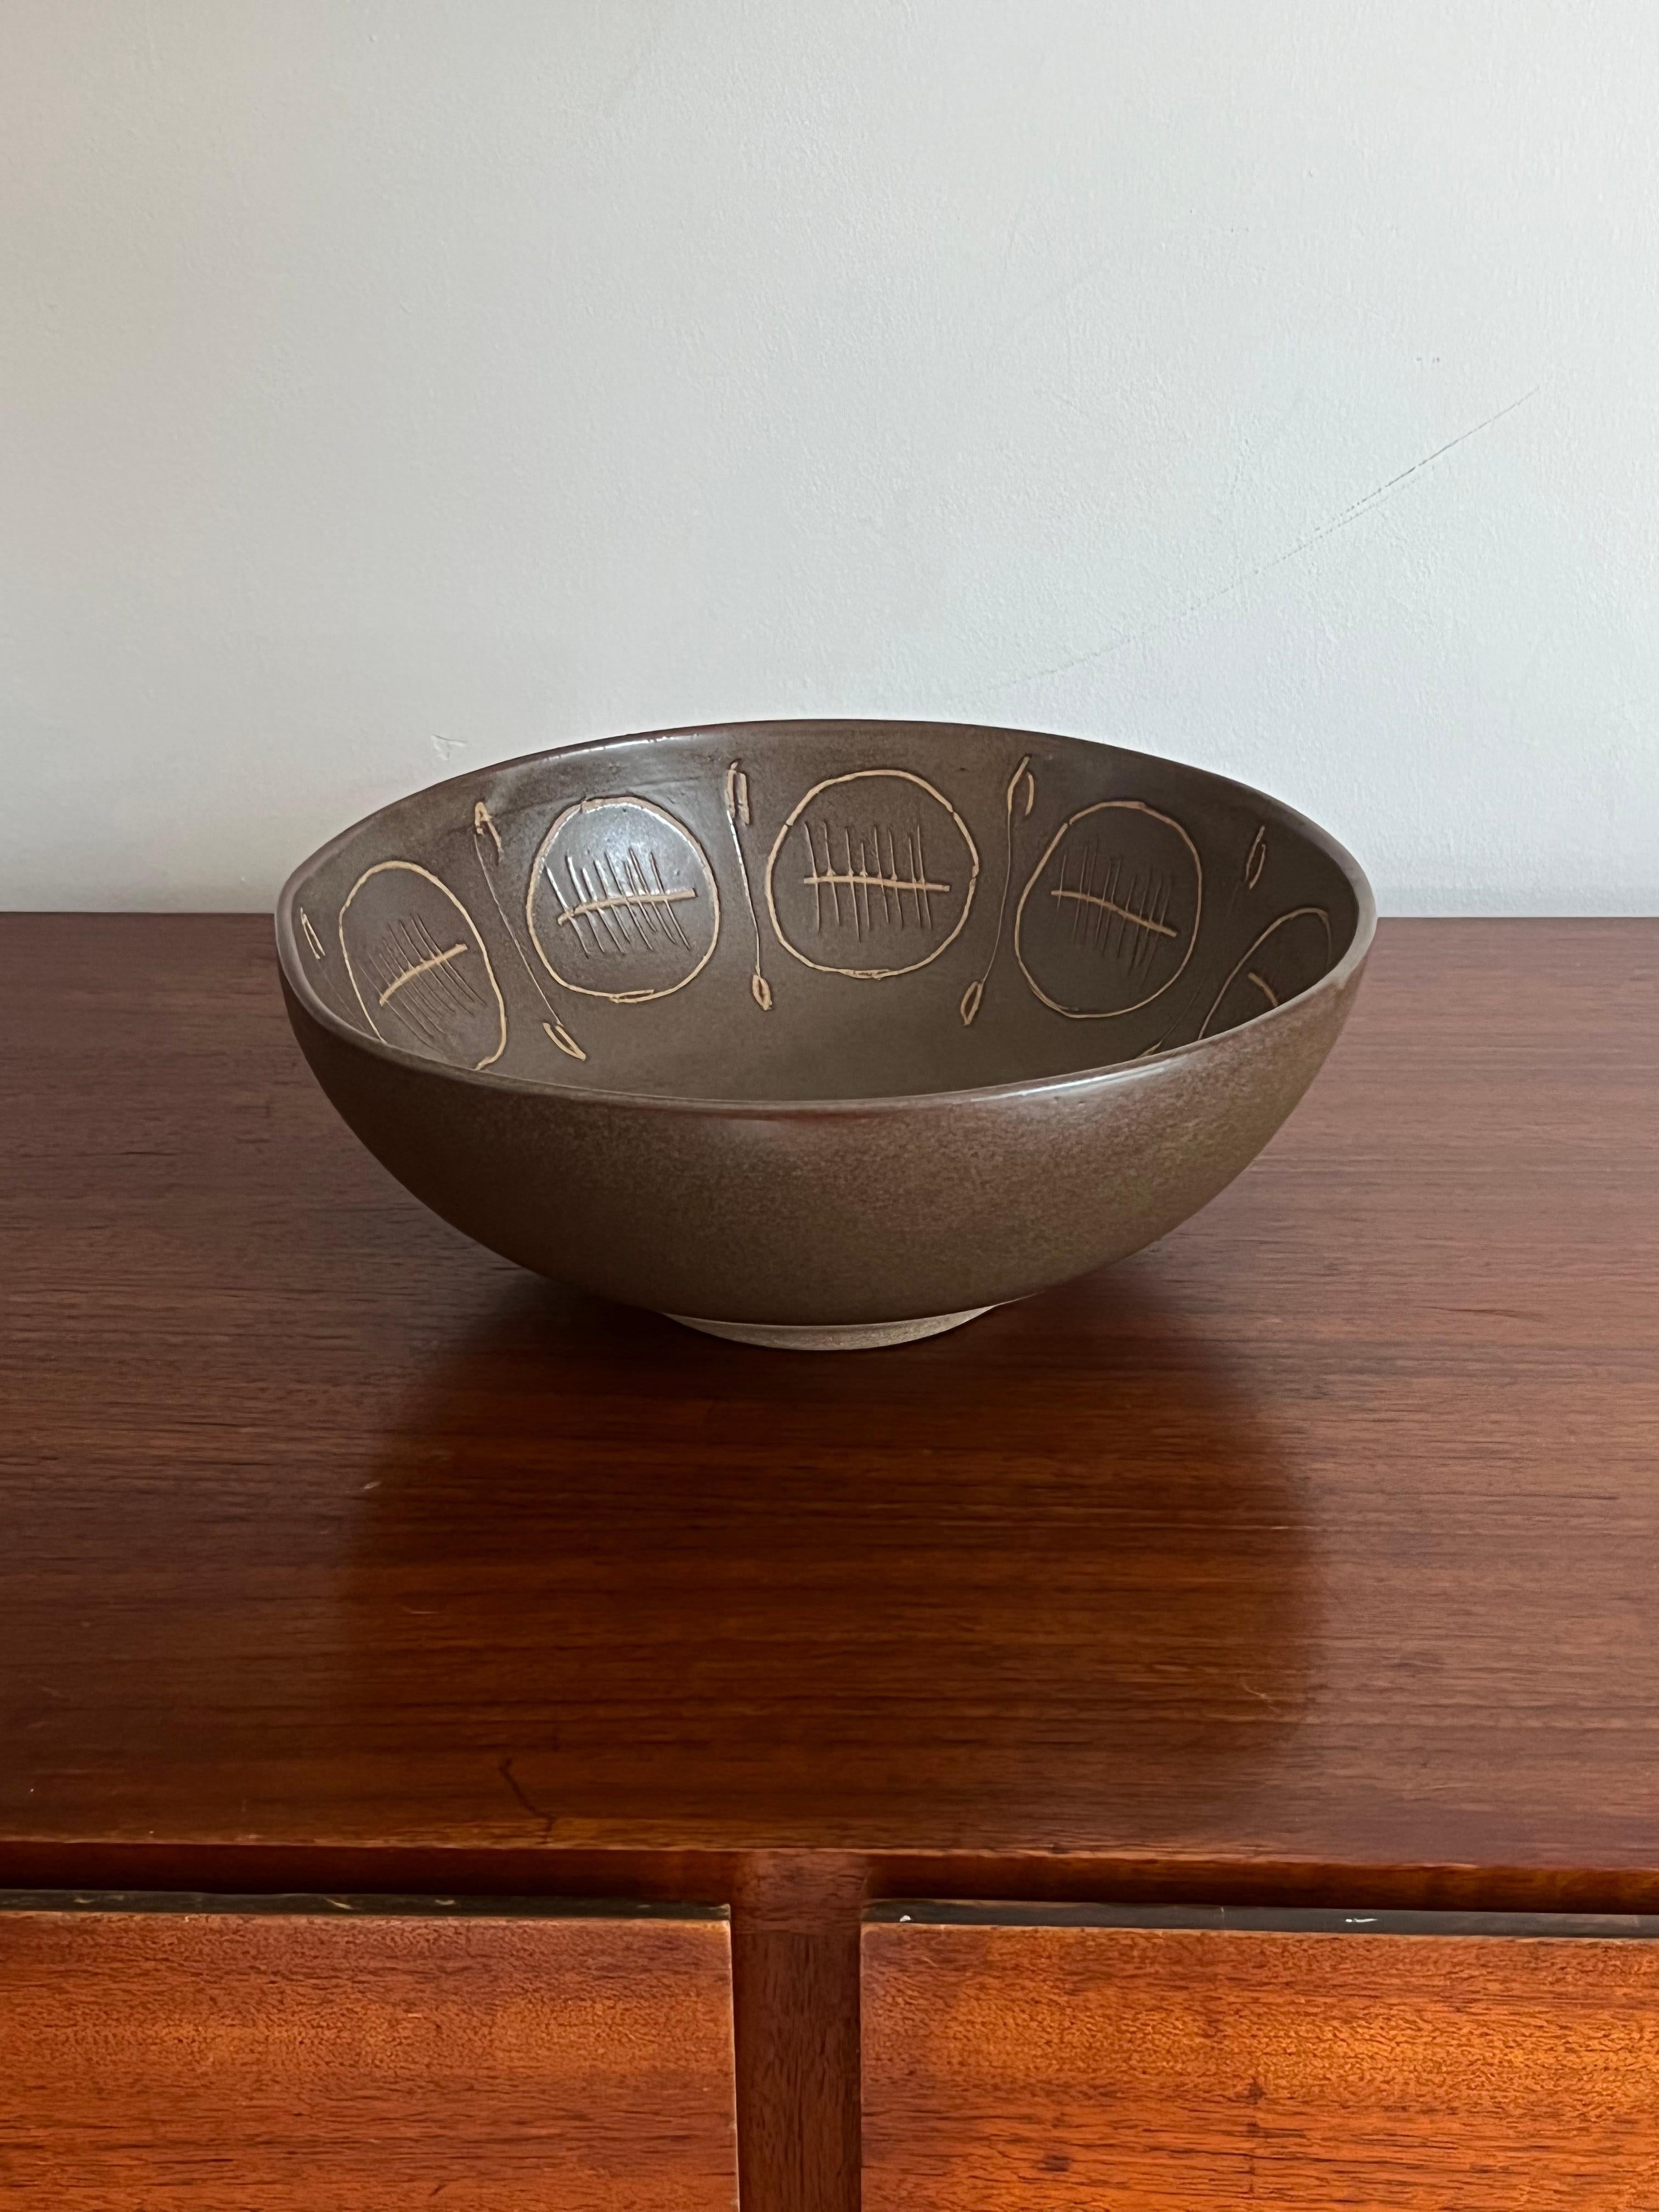 A very large centerpiece bowl designed by Jane and Gordon Martz for Marshall Studios. The couple is known for their ceramics lamps, but they also created matching housewares. Offered here is a beautiful dark olive green/ brown bowl with incised